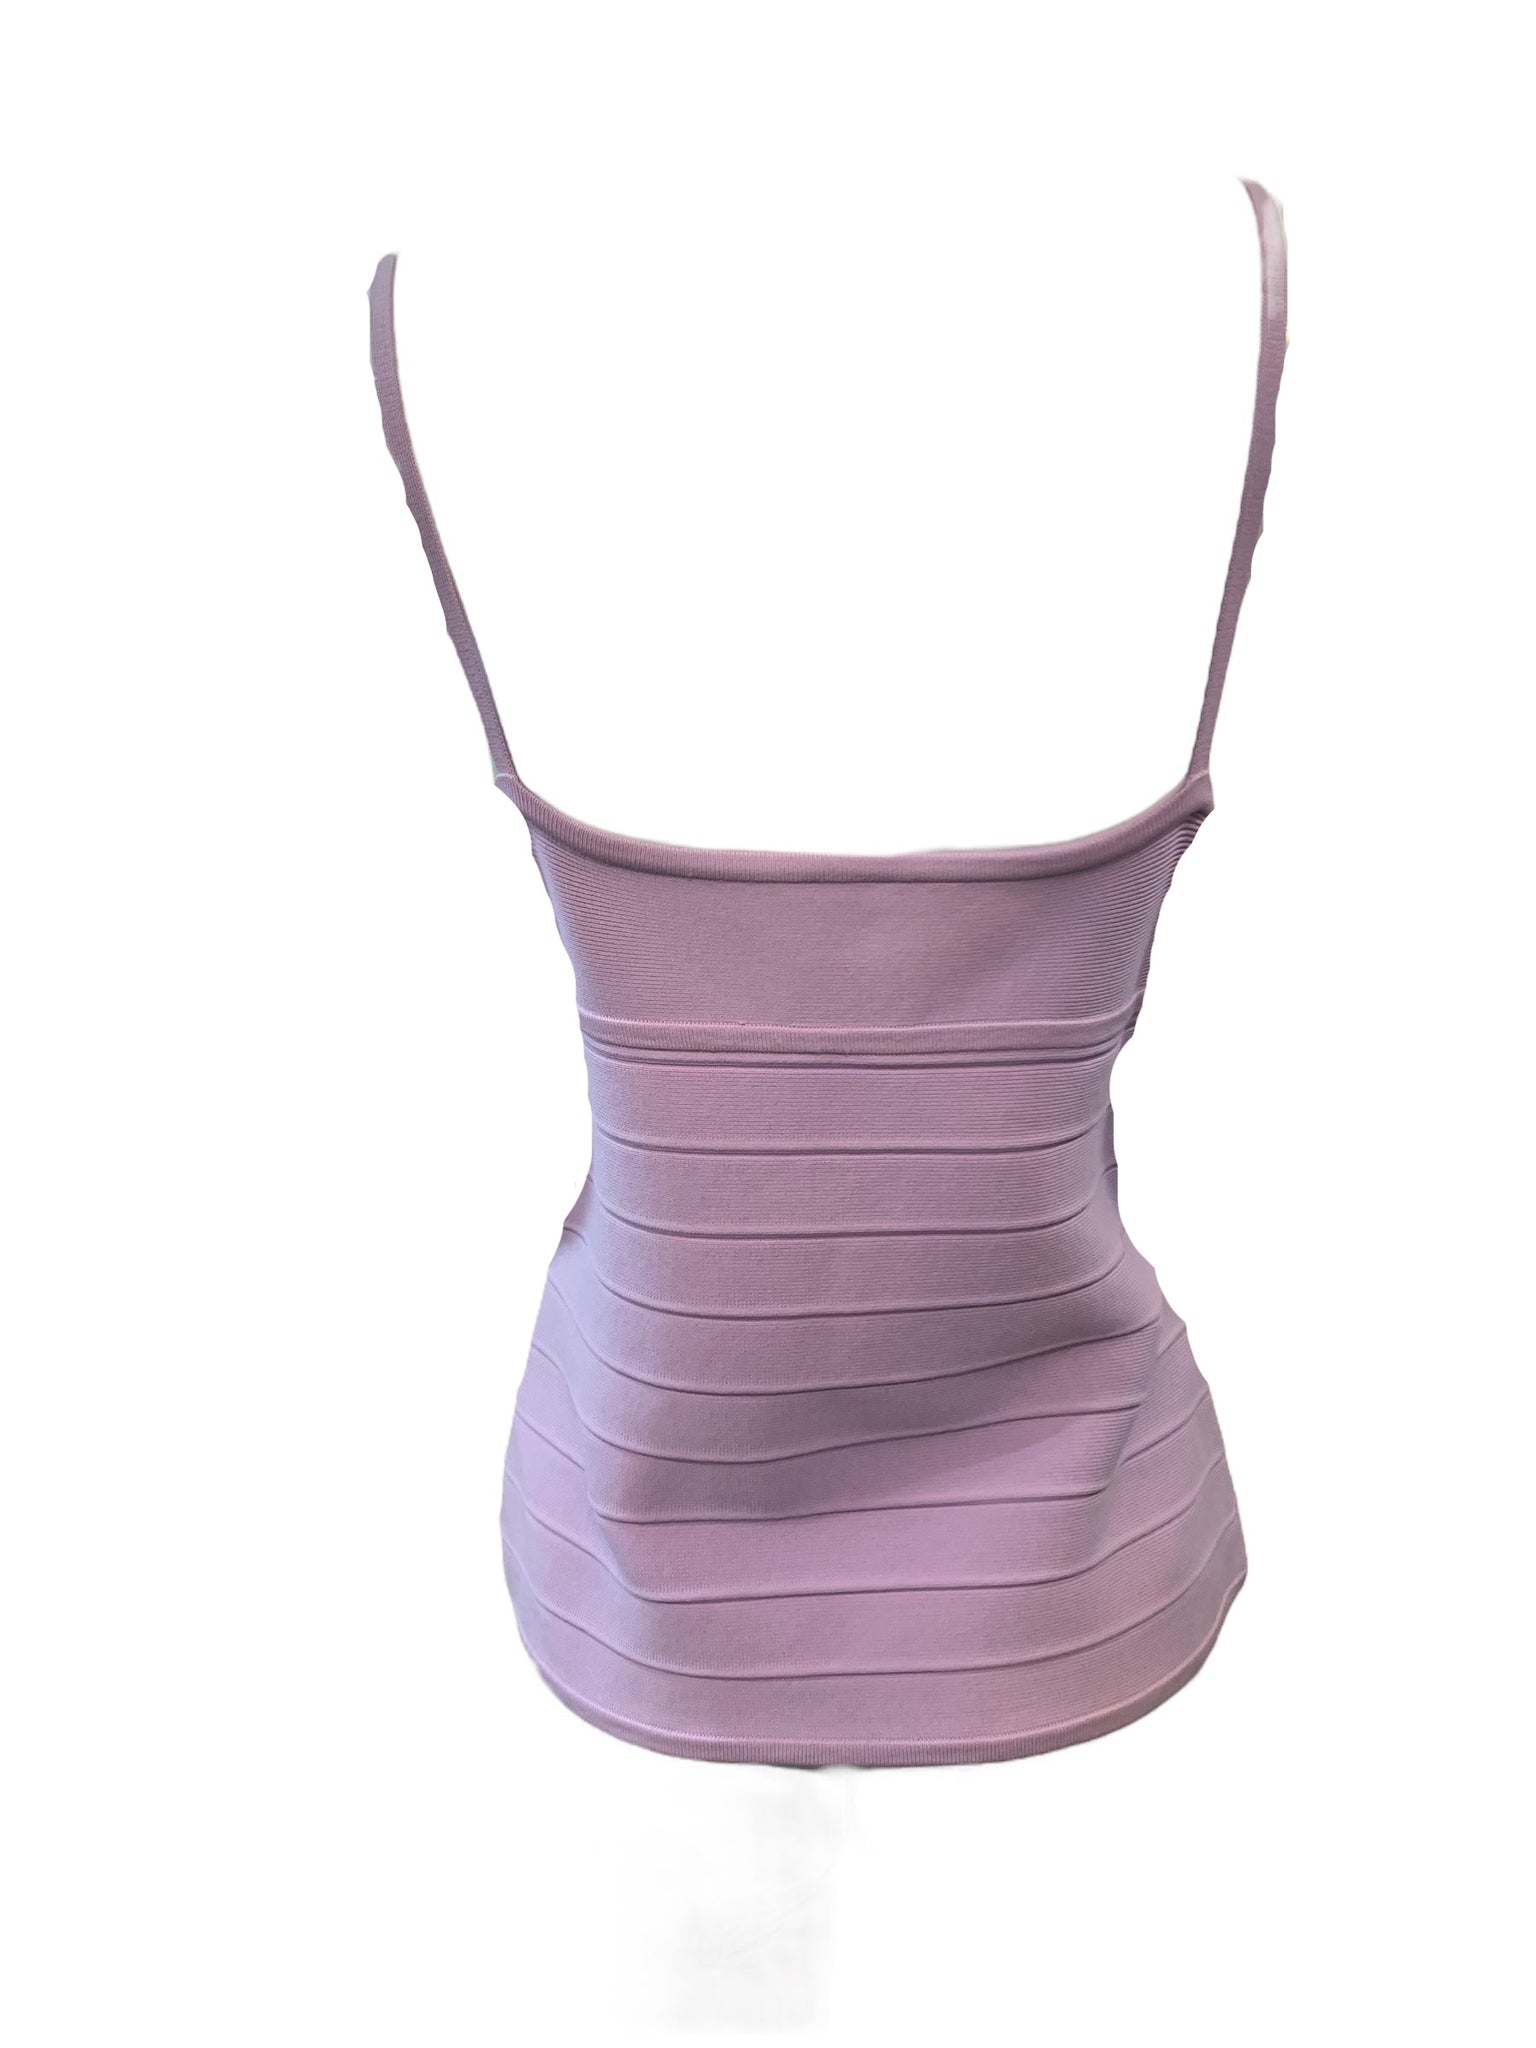 Herve Leger Y2K Lavender Bandage Knit Camisole with Zippers BACK 3 of 5